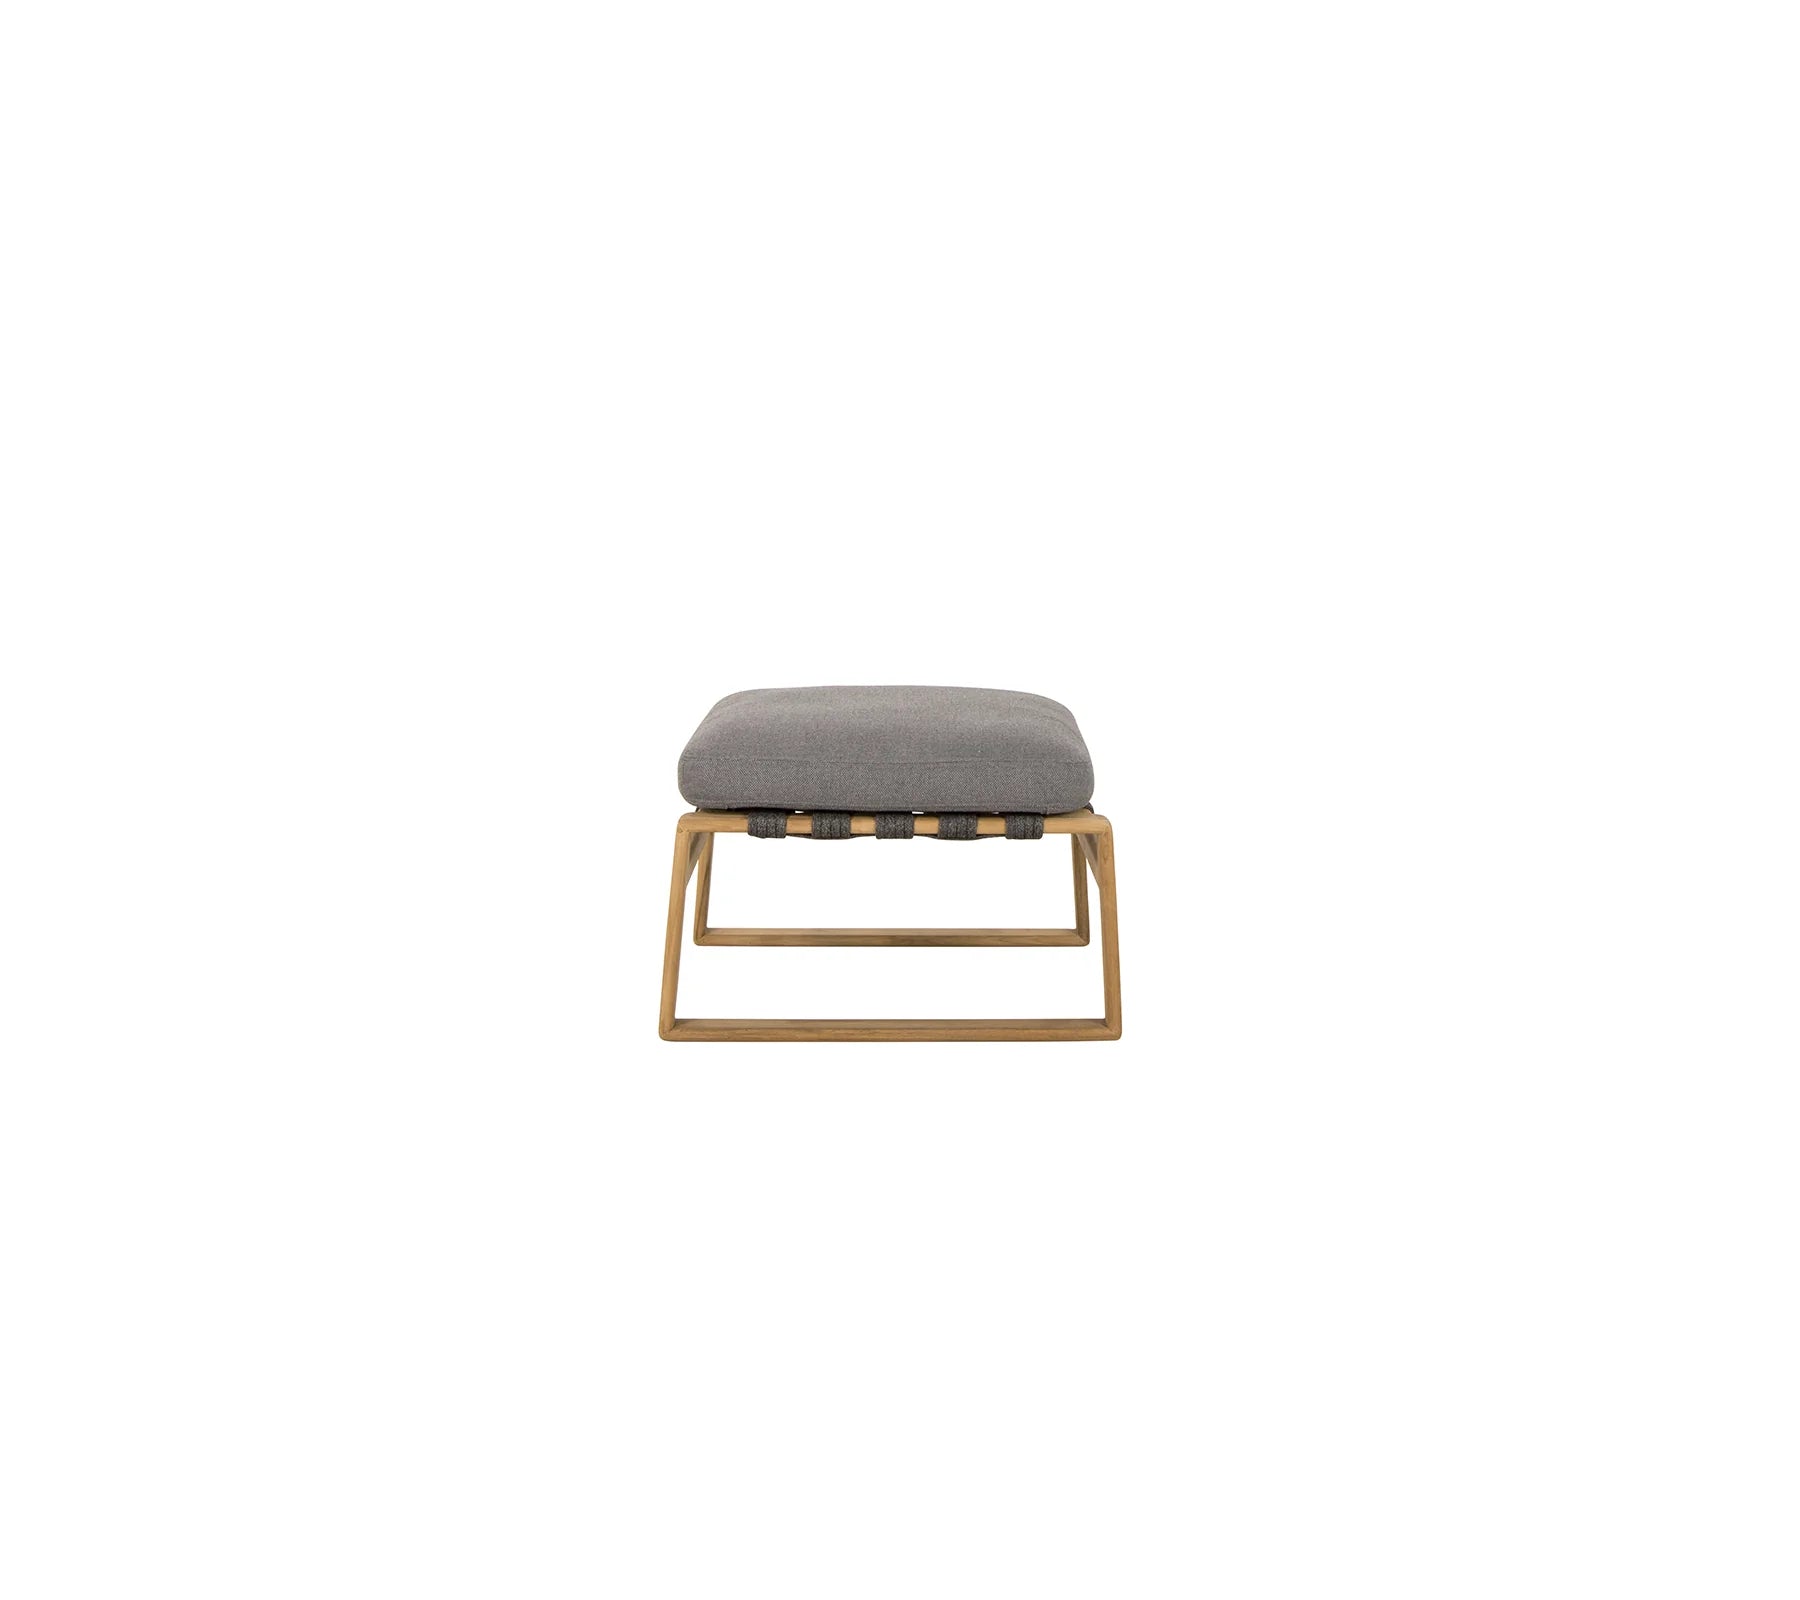 Boxhill's Endless Soft Outdoor Footstool in side view white background